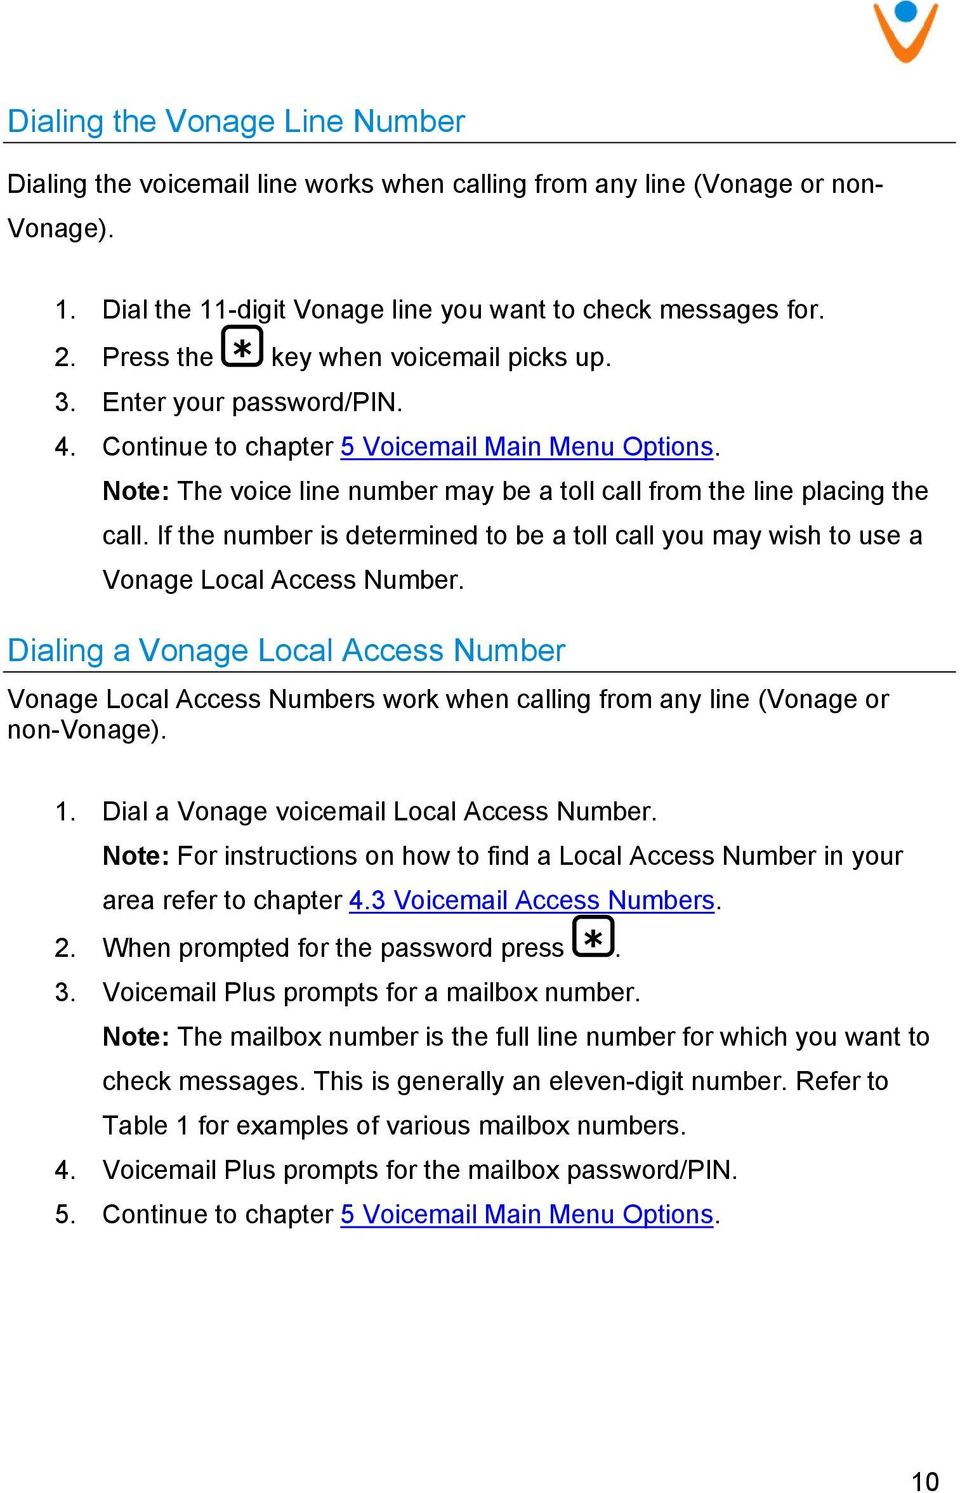 Note: The voice line number may be a toll call from the line placing the call. If the number is determined to be a toll call you may wish to use a Vonage Local Access Number.